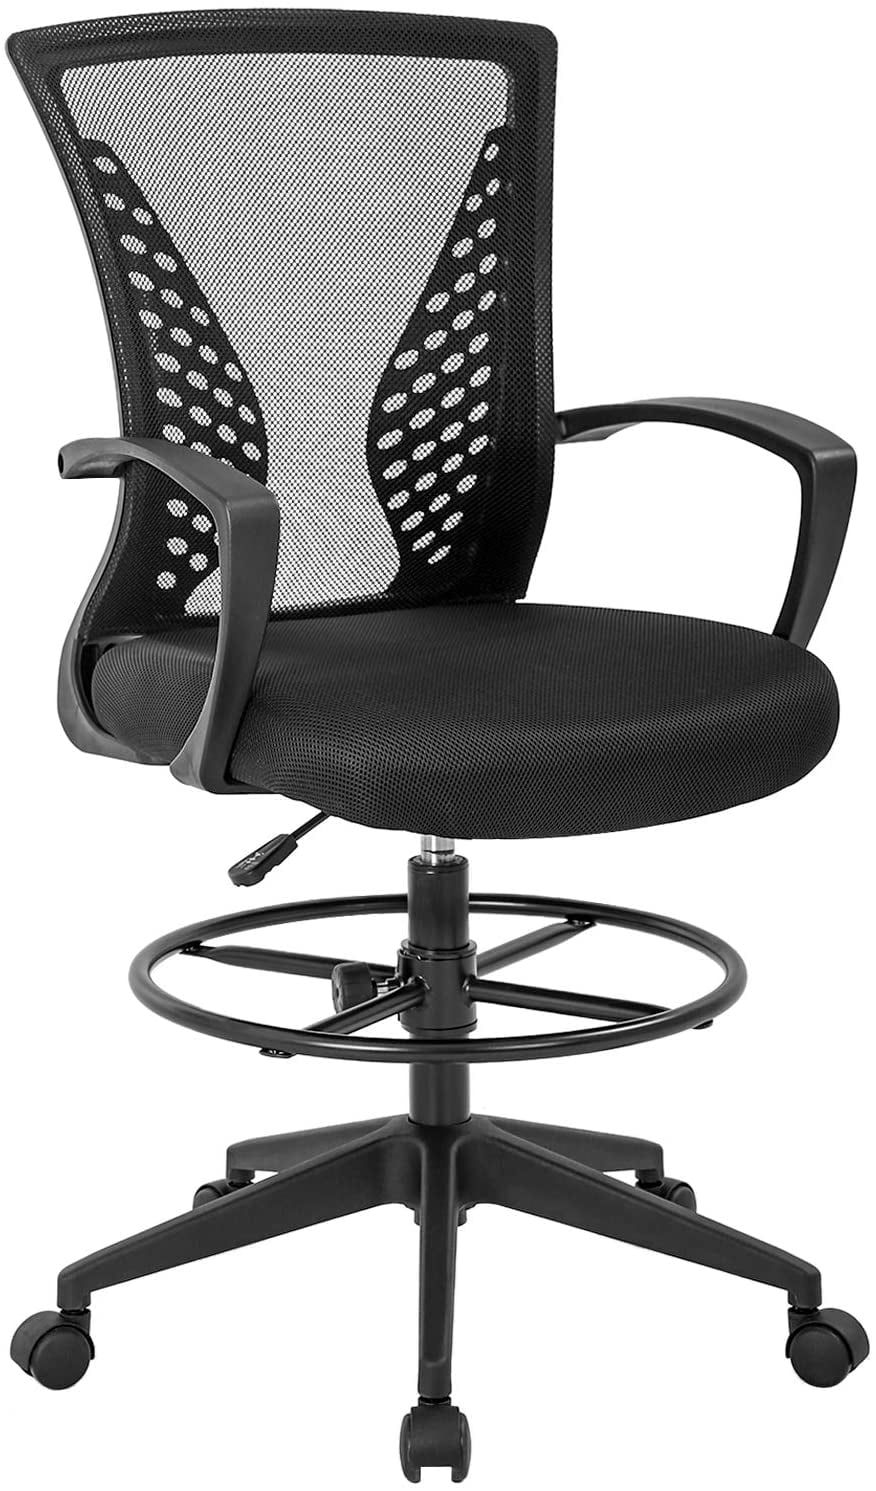 Black Drafting Chair Tall Office Desk Chair for Standing Desk,Mesh Adjustable Height Drafting Stool with Flip Up Arms Foot Rest Lumbar Support,Mid-Back Ergonomic Computer Executive Rolling Chair 